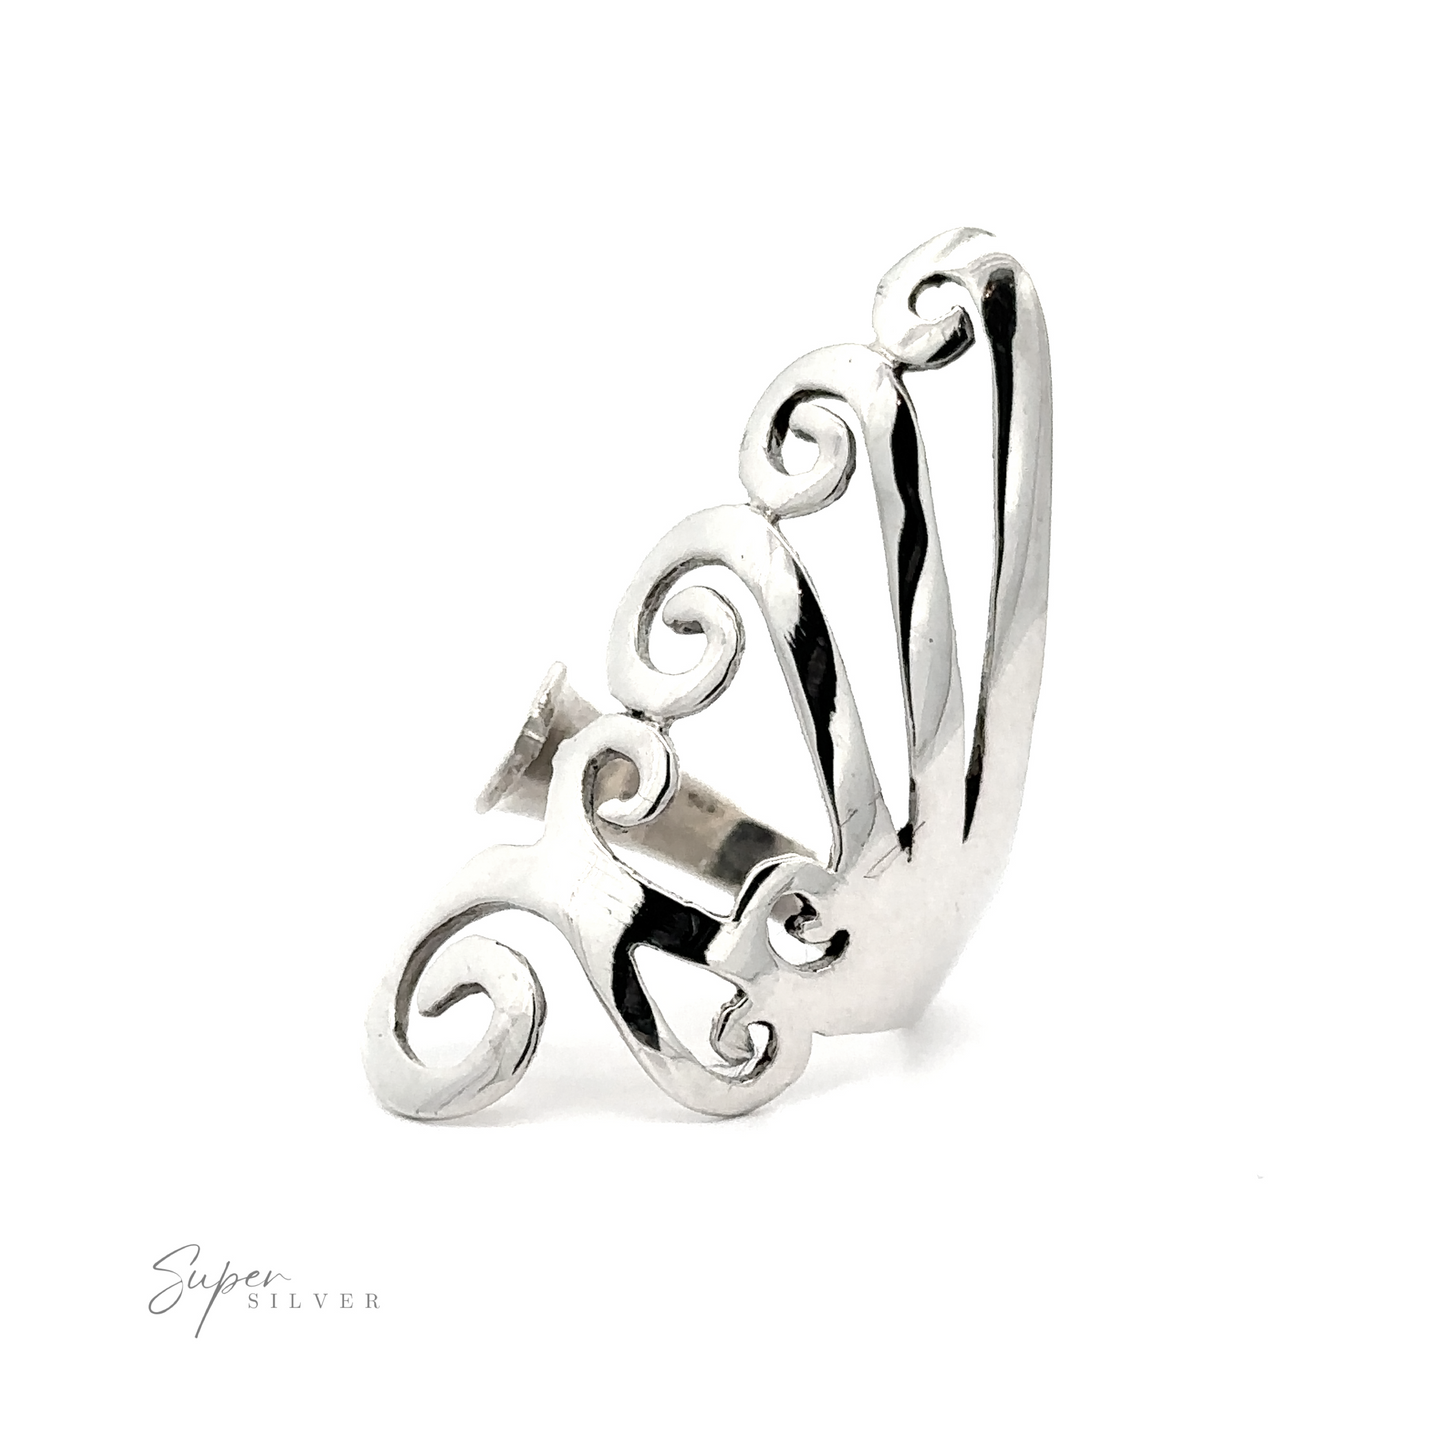 An adjustable Freestyle ring with a swirl design.